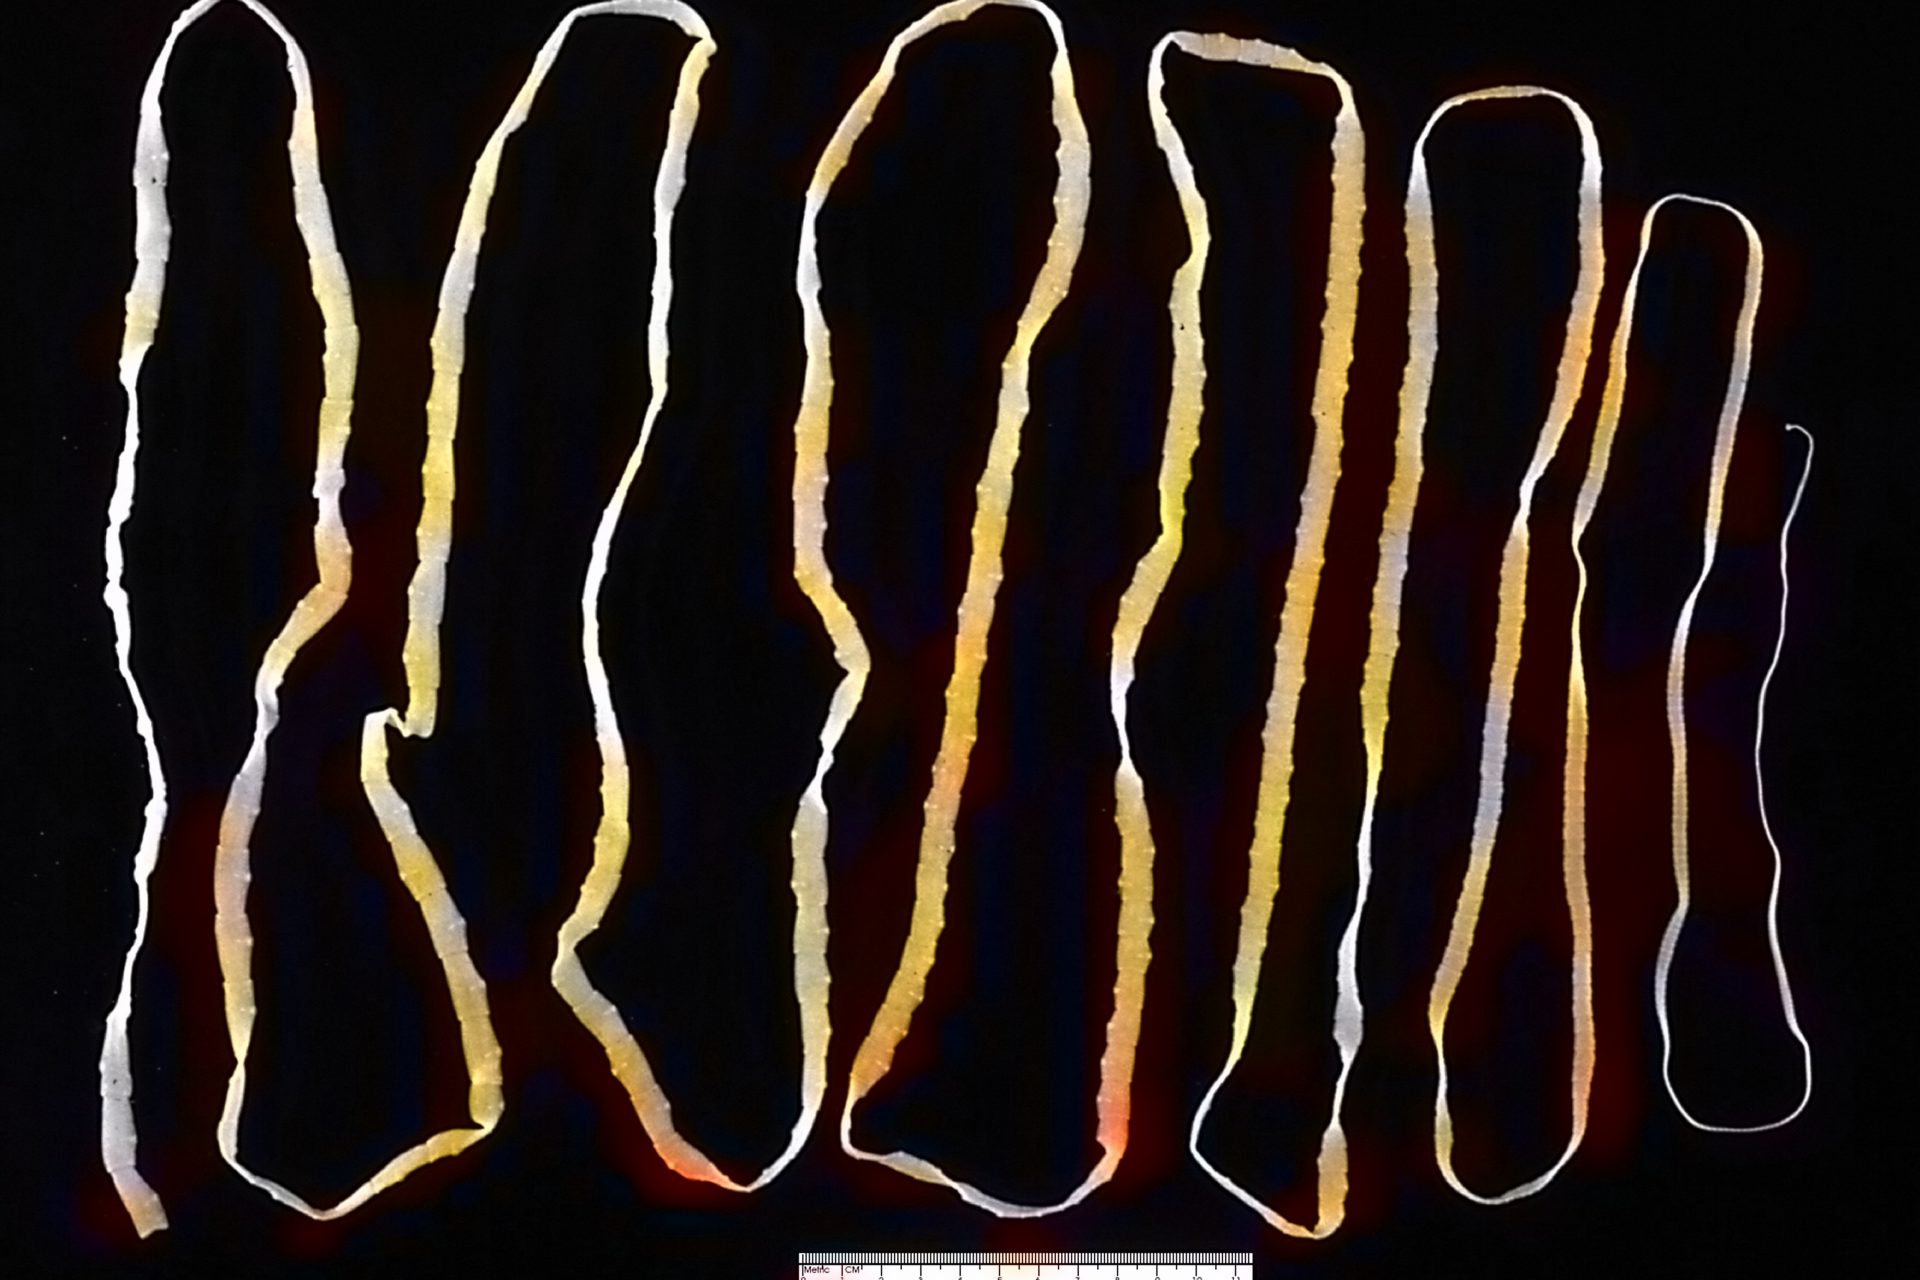 Tapeworms go to disturbing lengths  